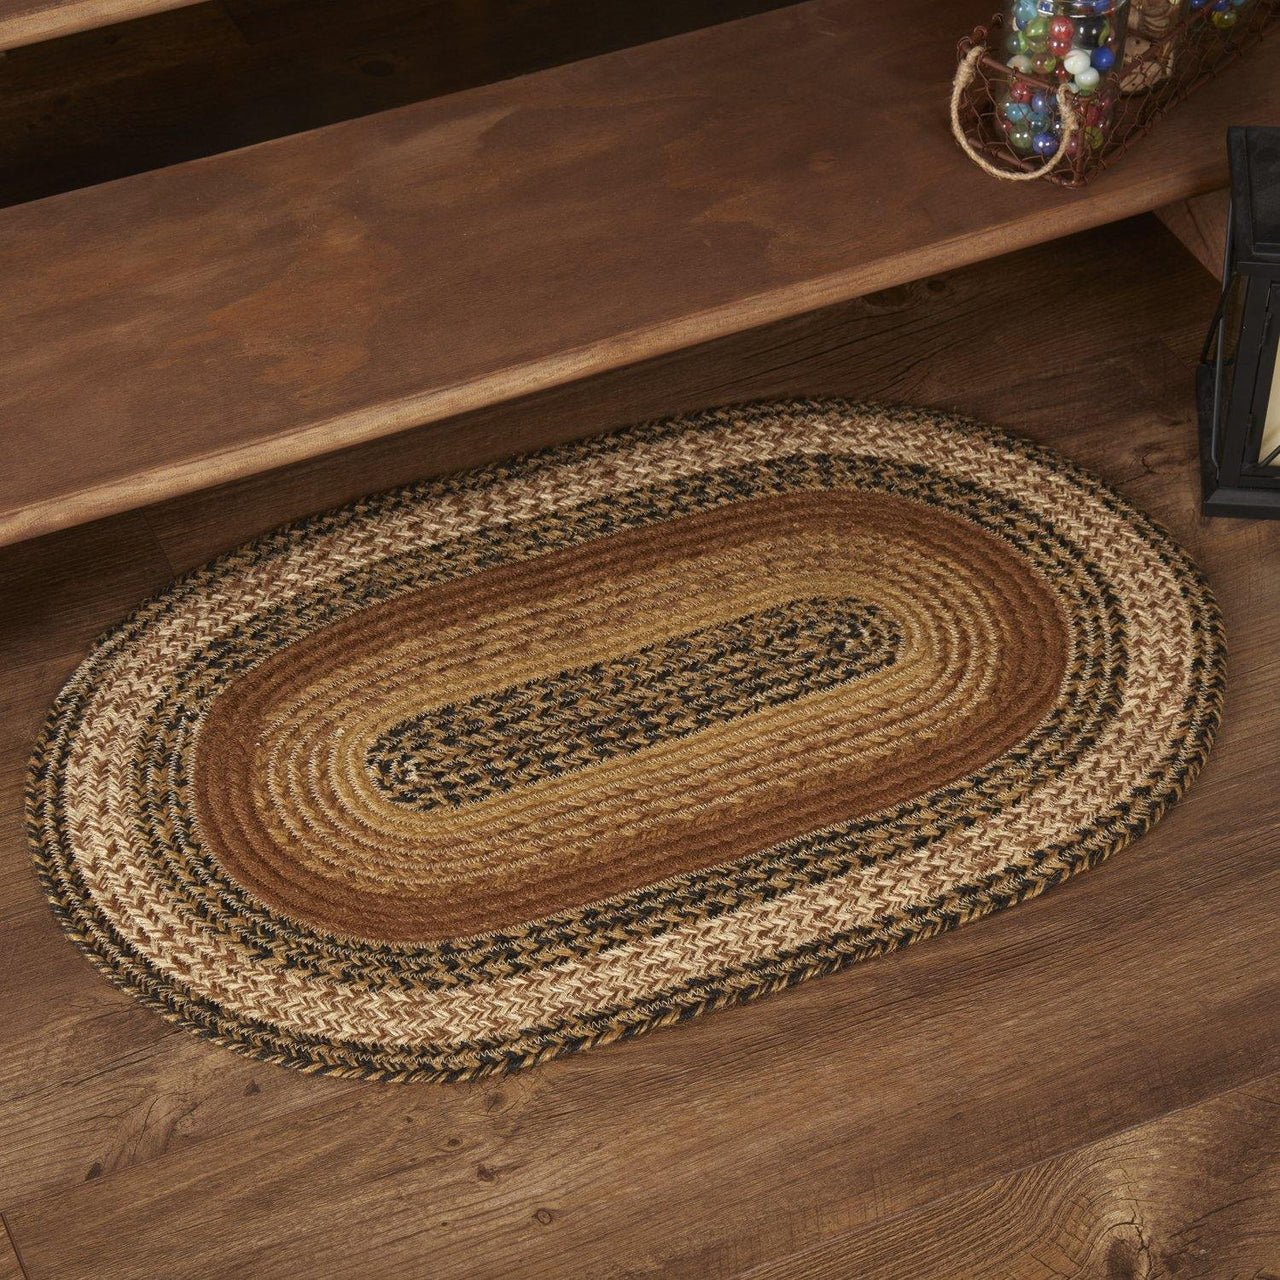 Kettle Grove Jute Braided Rug Oval 20"x30"with Rug Pad VHC Brands - The Fox Decor